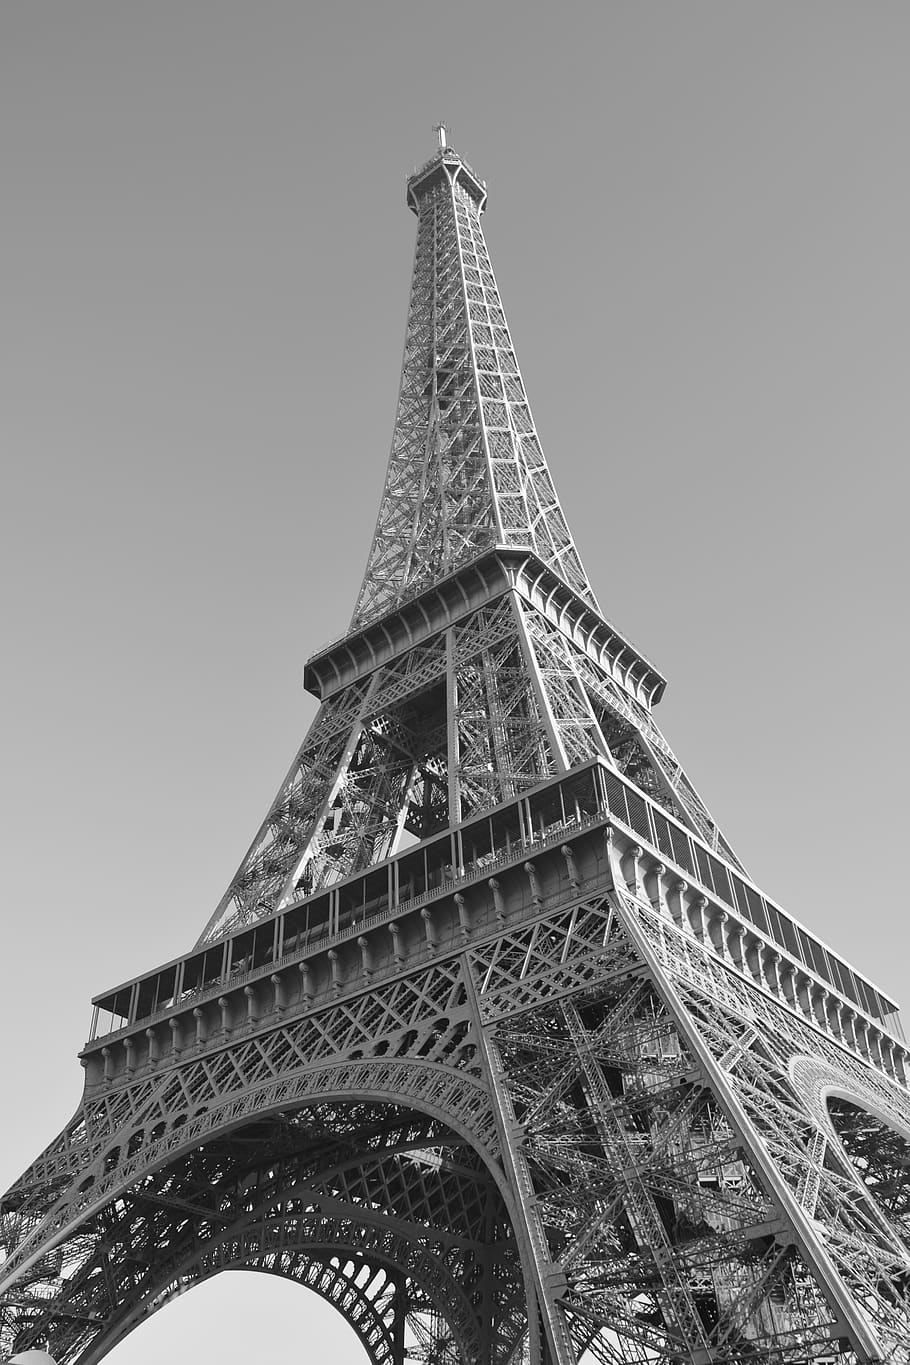 eiffel tower, eiffel tower monument historic, paris, black and white photo, architecture metal, three floors, weight 10100 tons, height-324 metres, paris france, capital